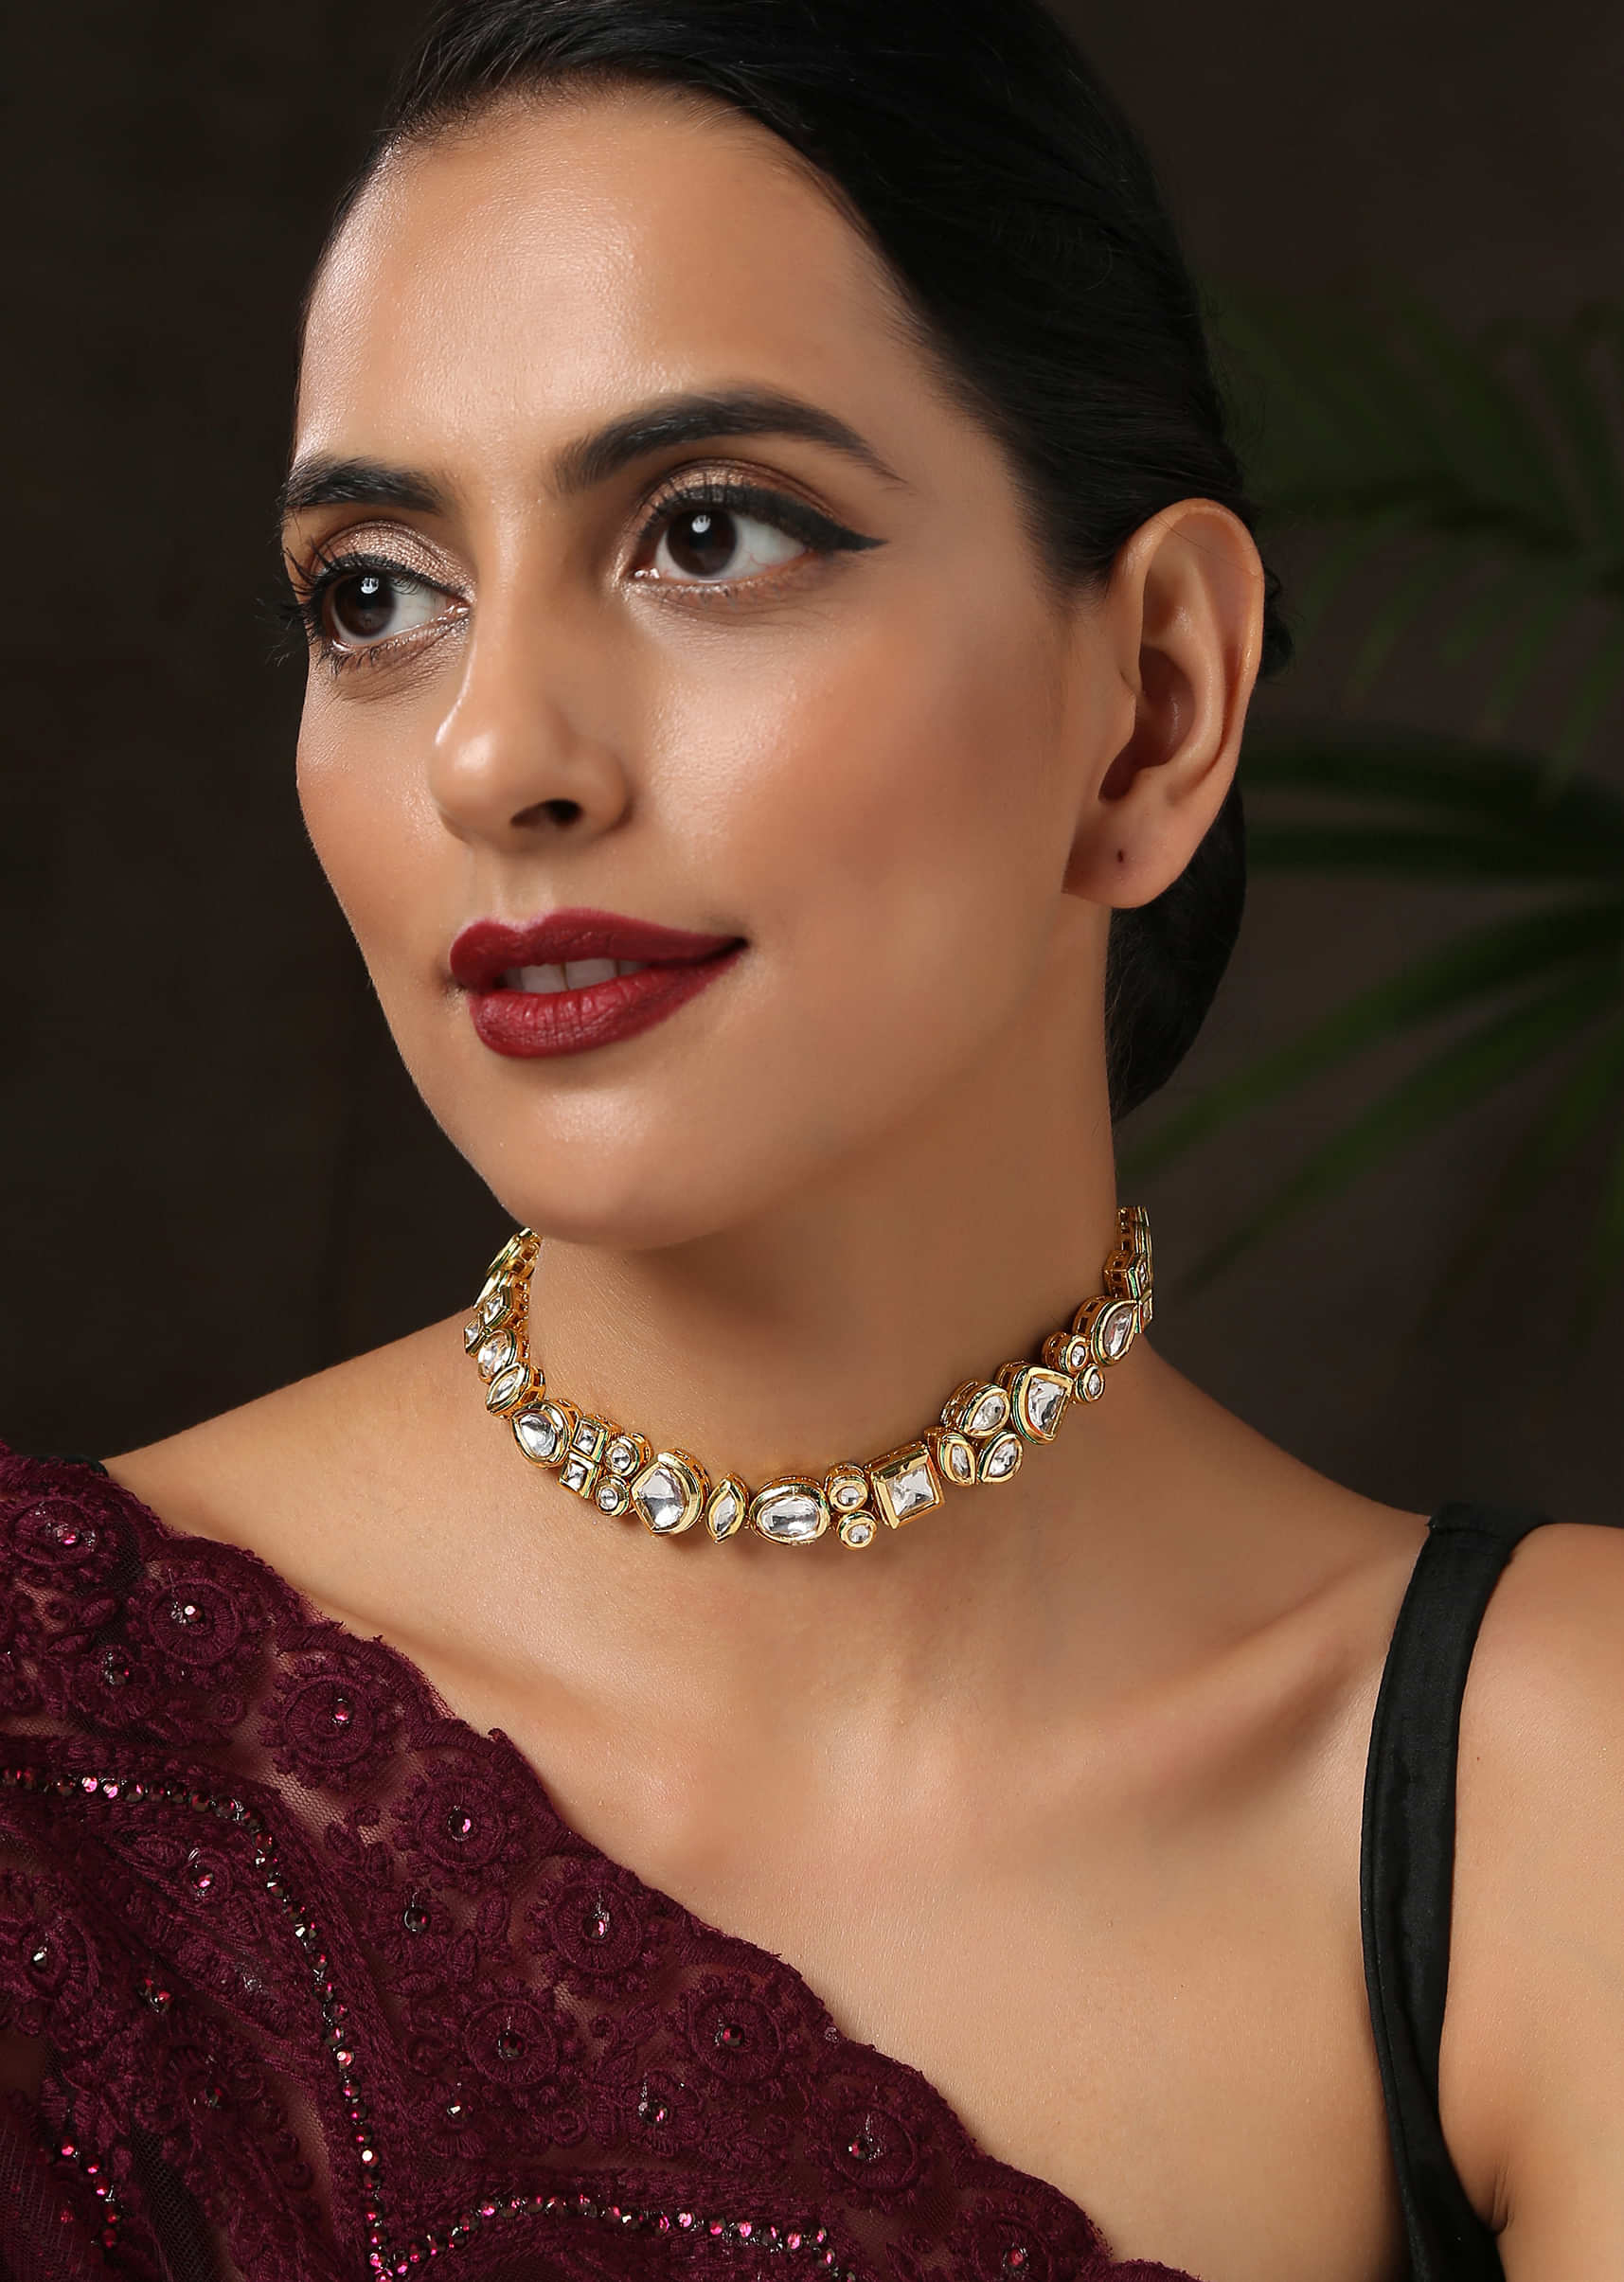 Gold Minimalist Choker Necklace In An Edgy Kundan Design By Paisley Pop